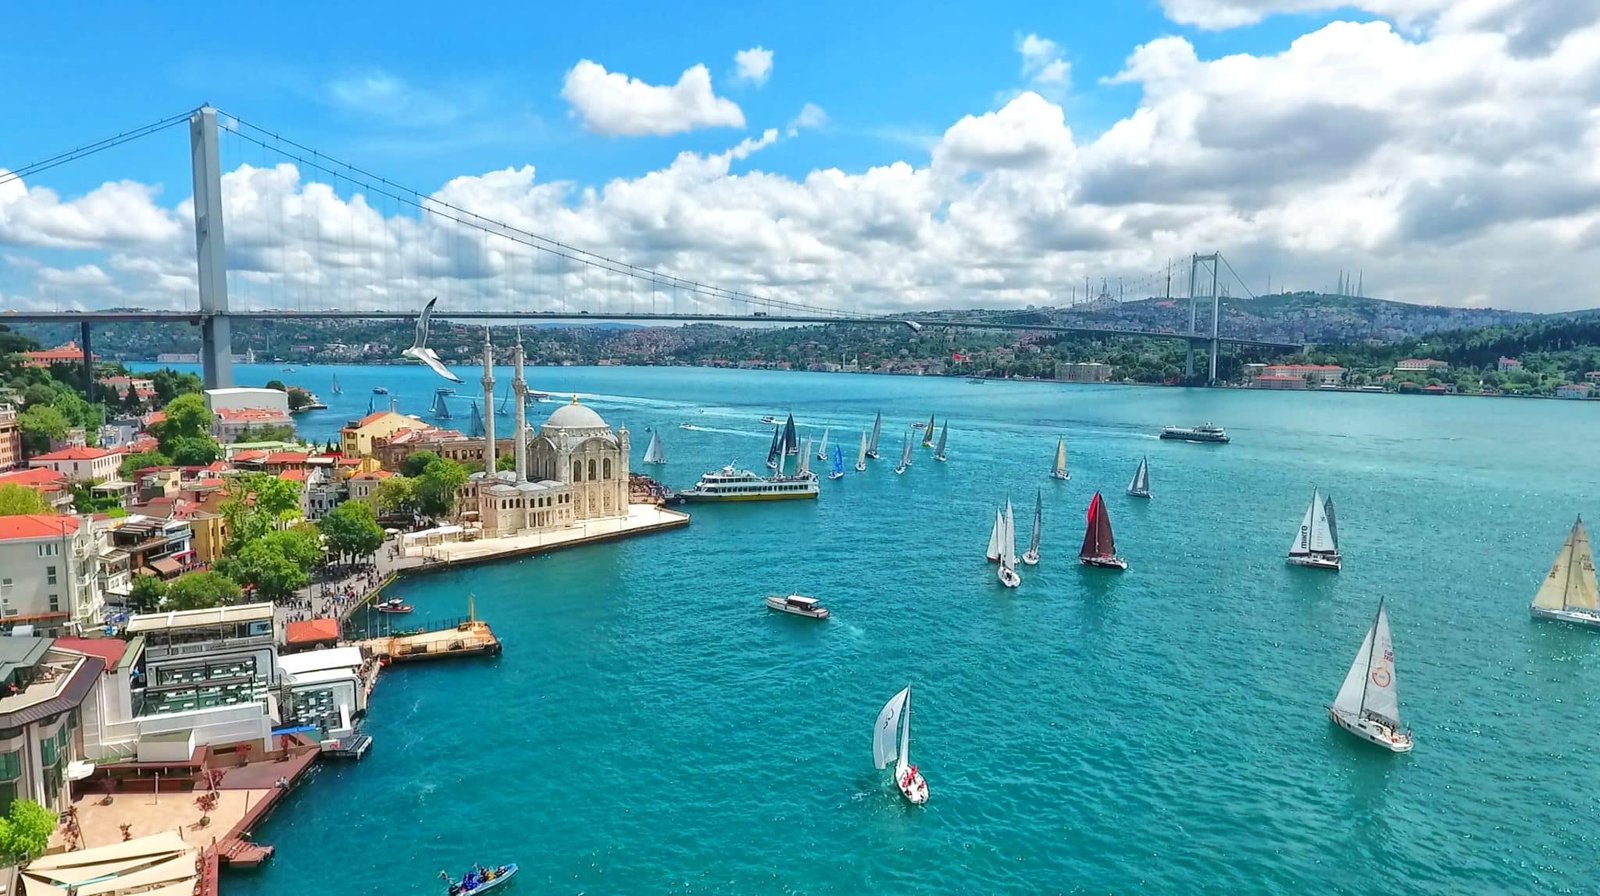 View of Istanbul Bosphorus with sailing boats passing under the bridge and mosque to the left hand side